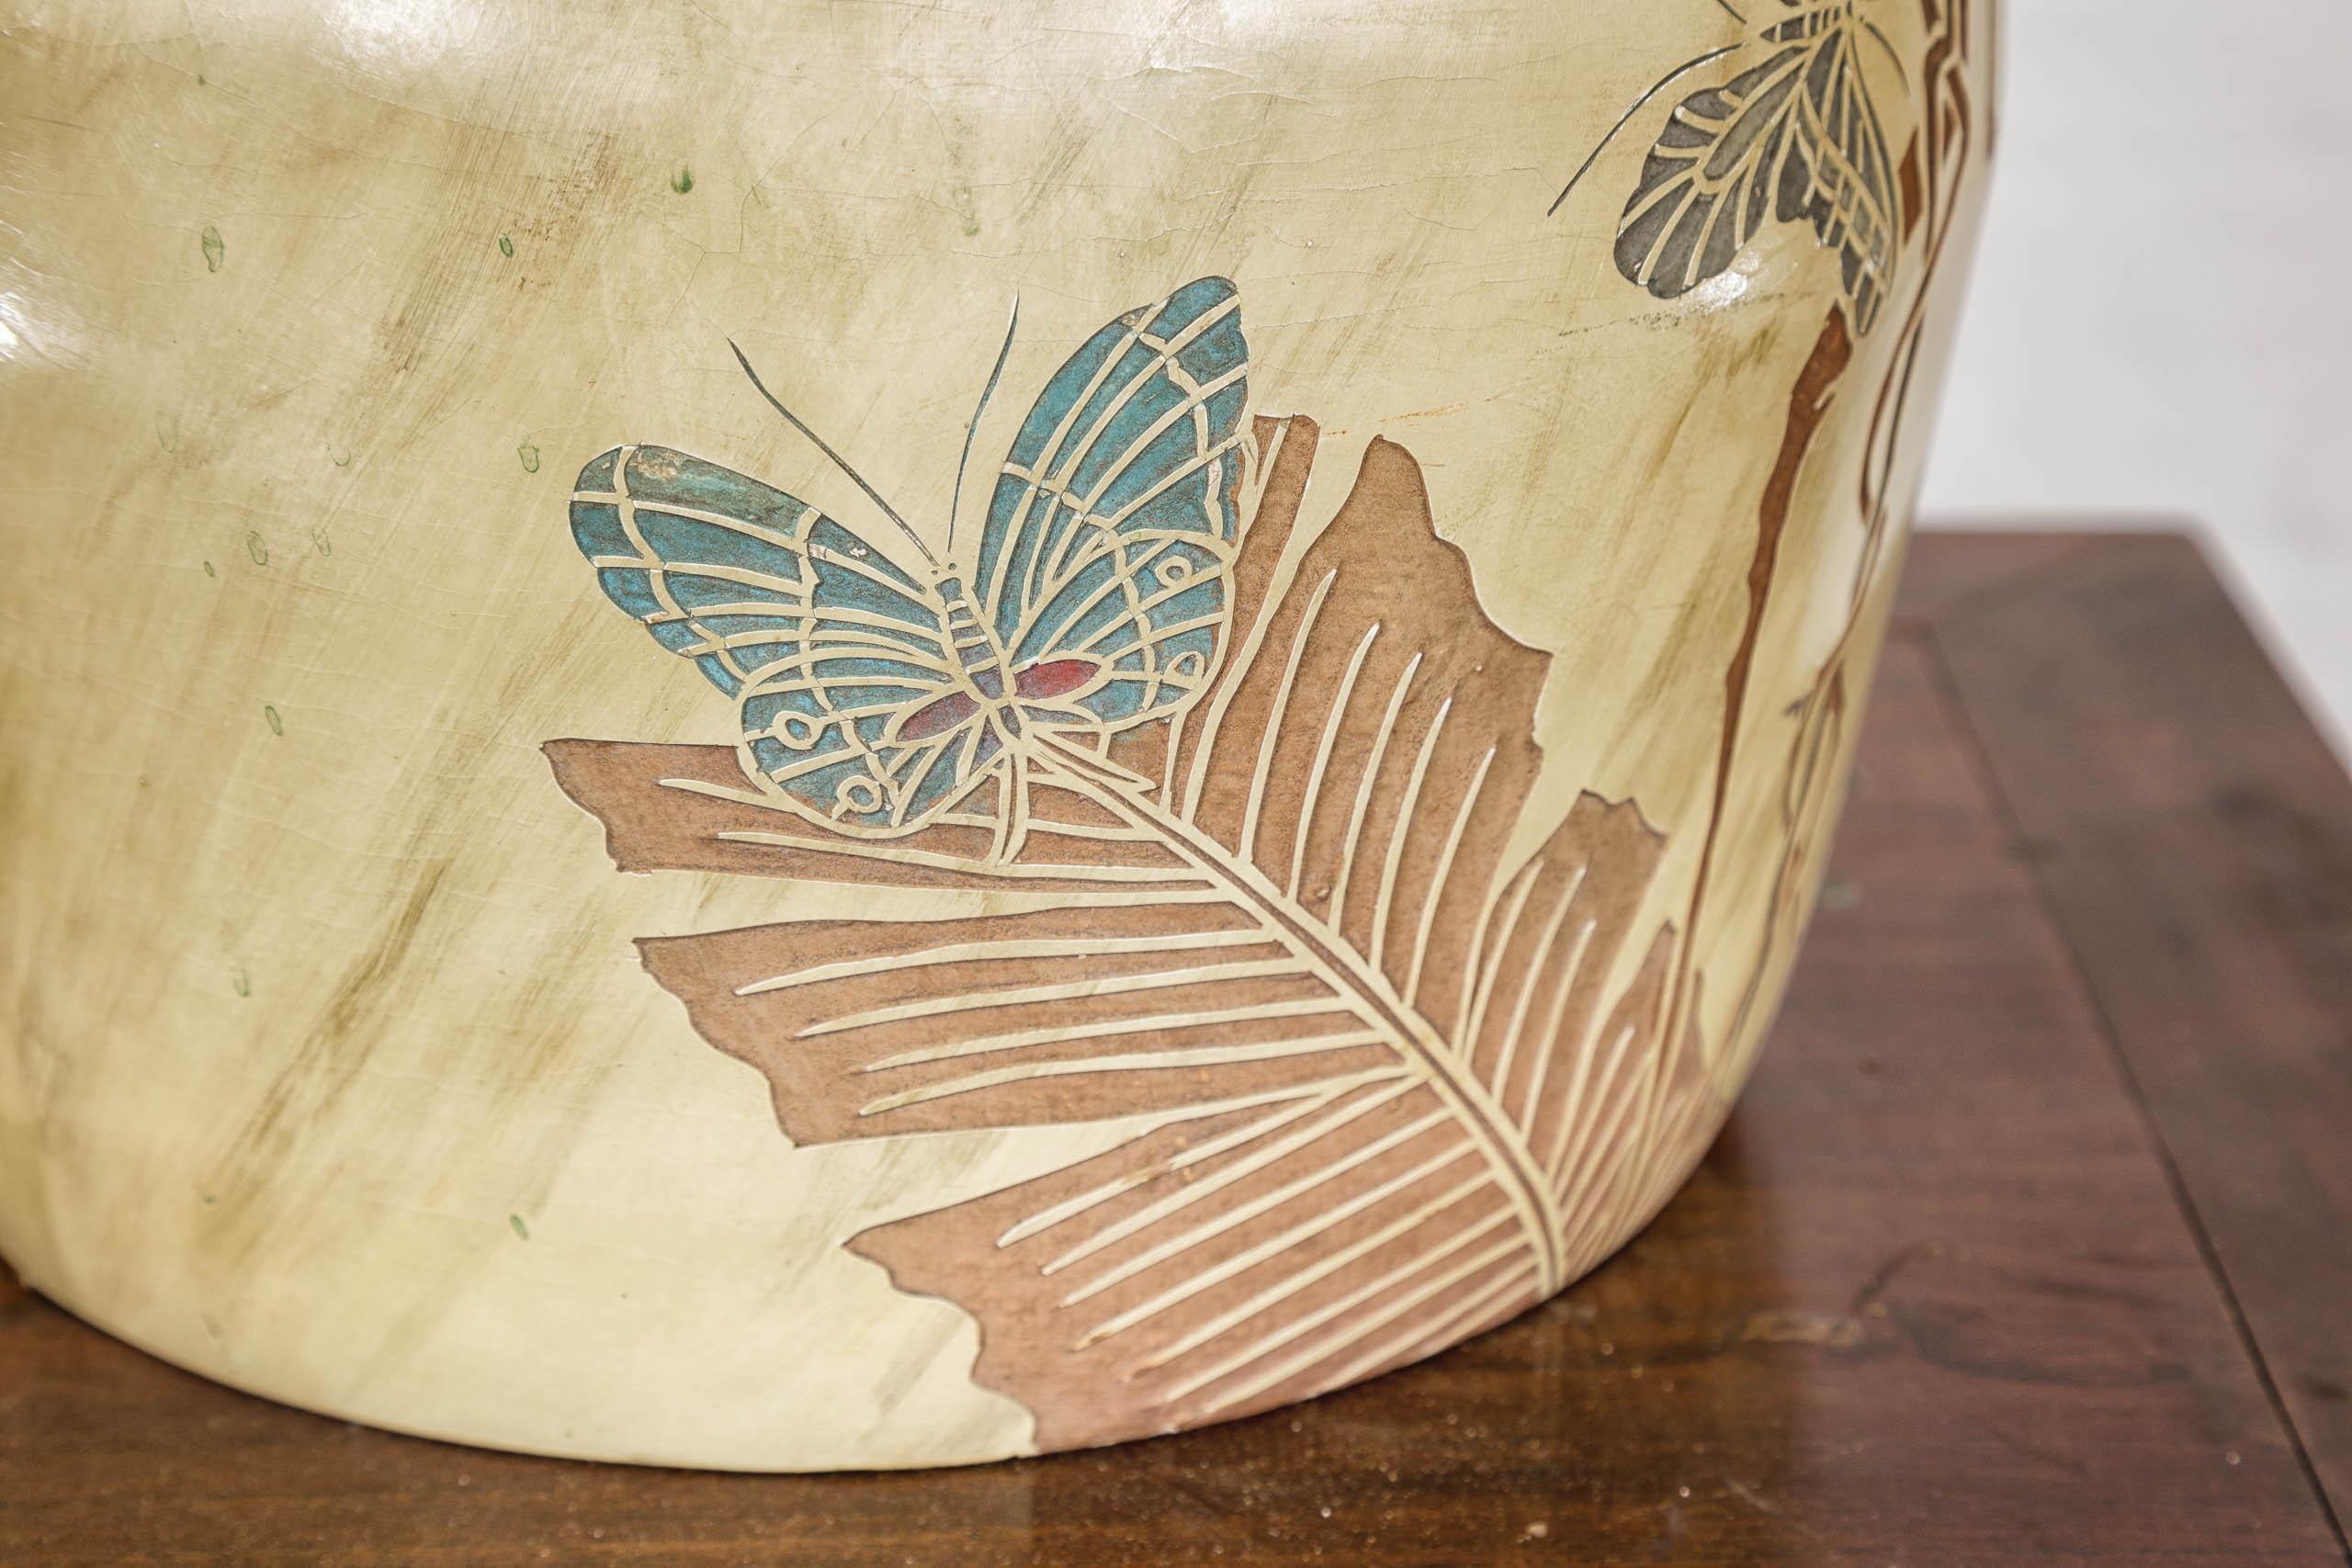 Japanese Antique Mustard Glaze Ceramic Planter with Incised Butterfly Decor For Sale 8